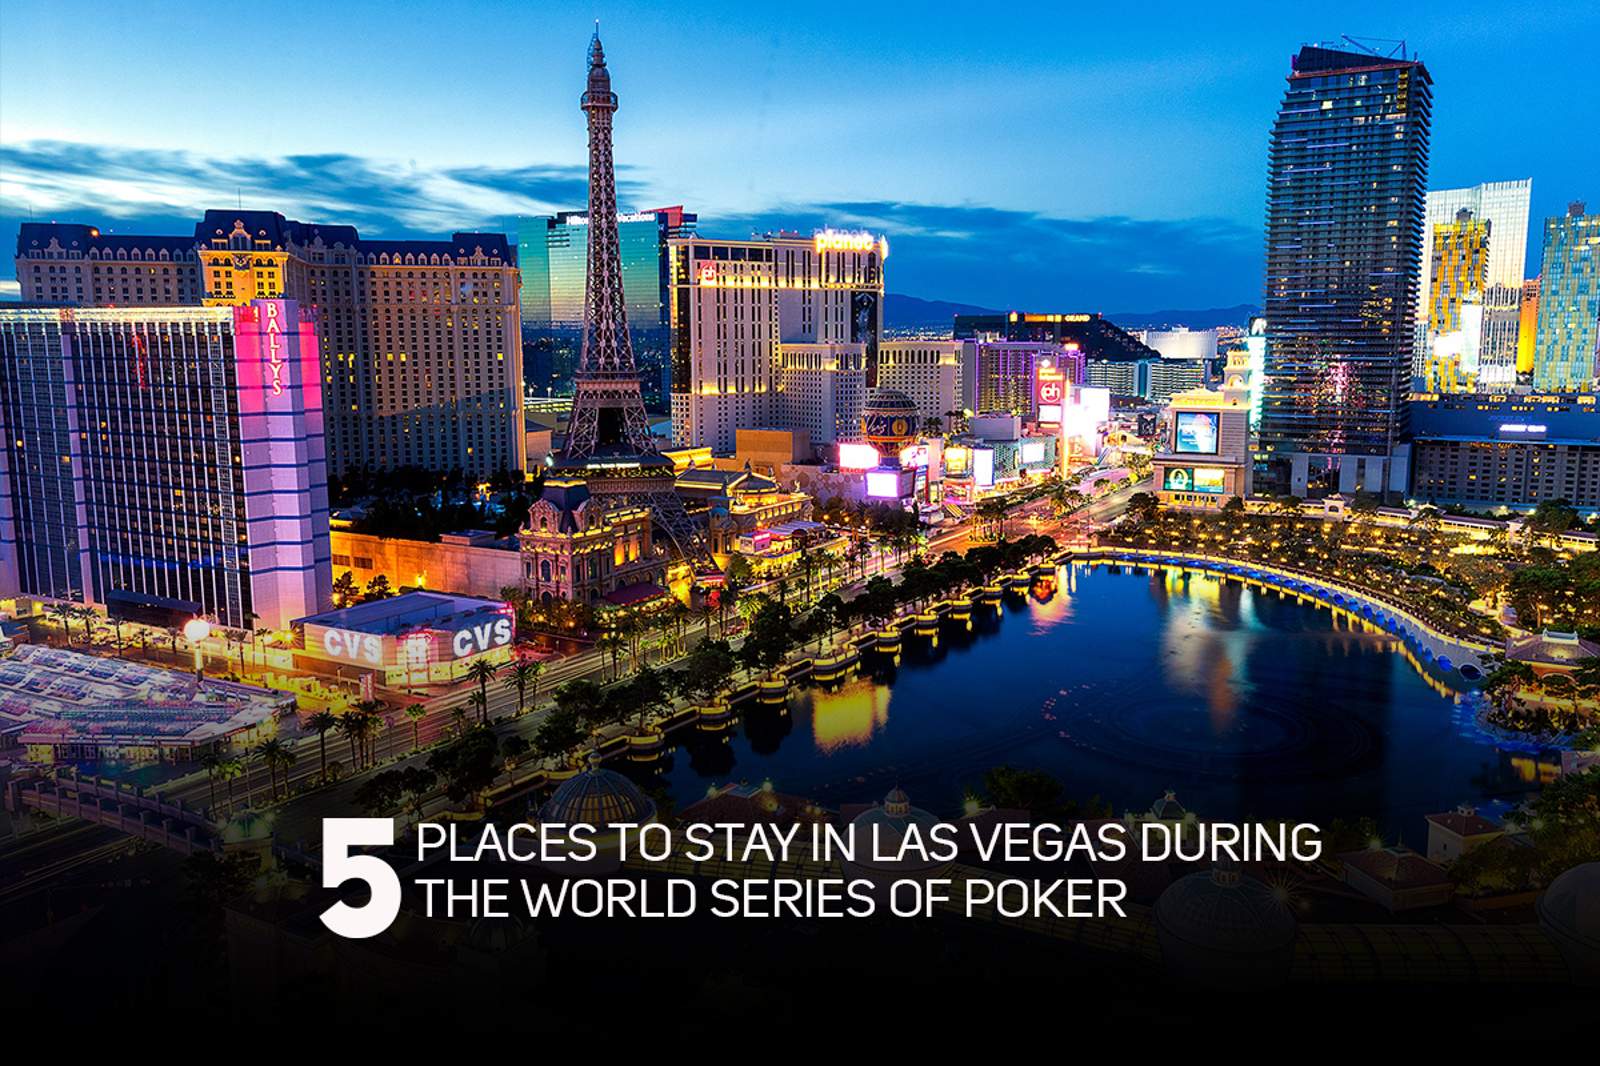 Top 5 Places to Stay in Las Vegas During the 2019 World Series of Poker